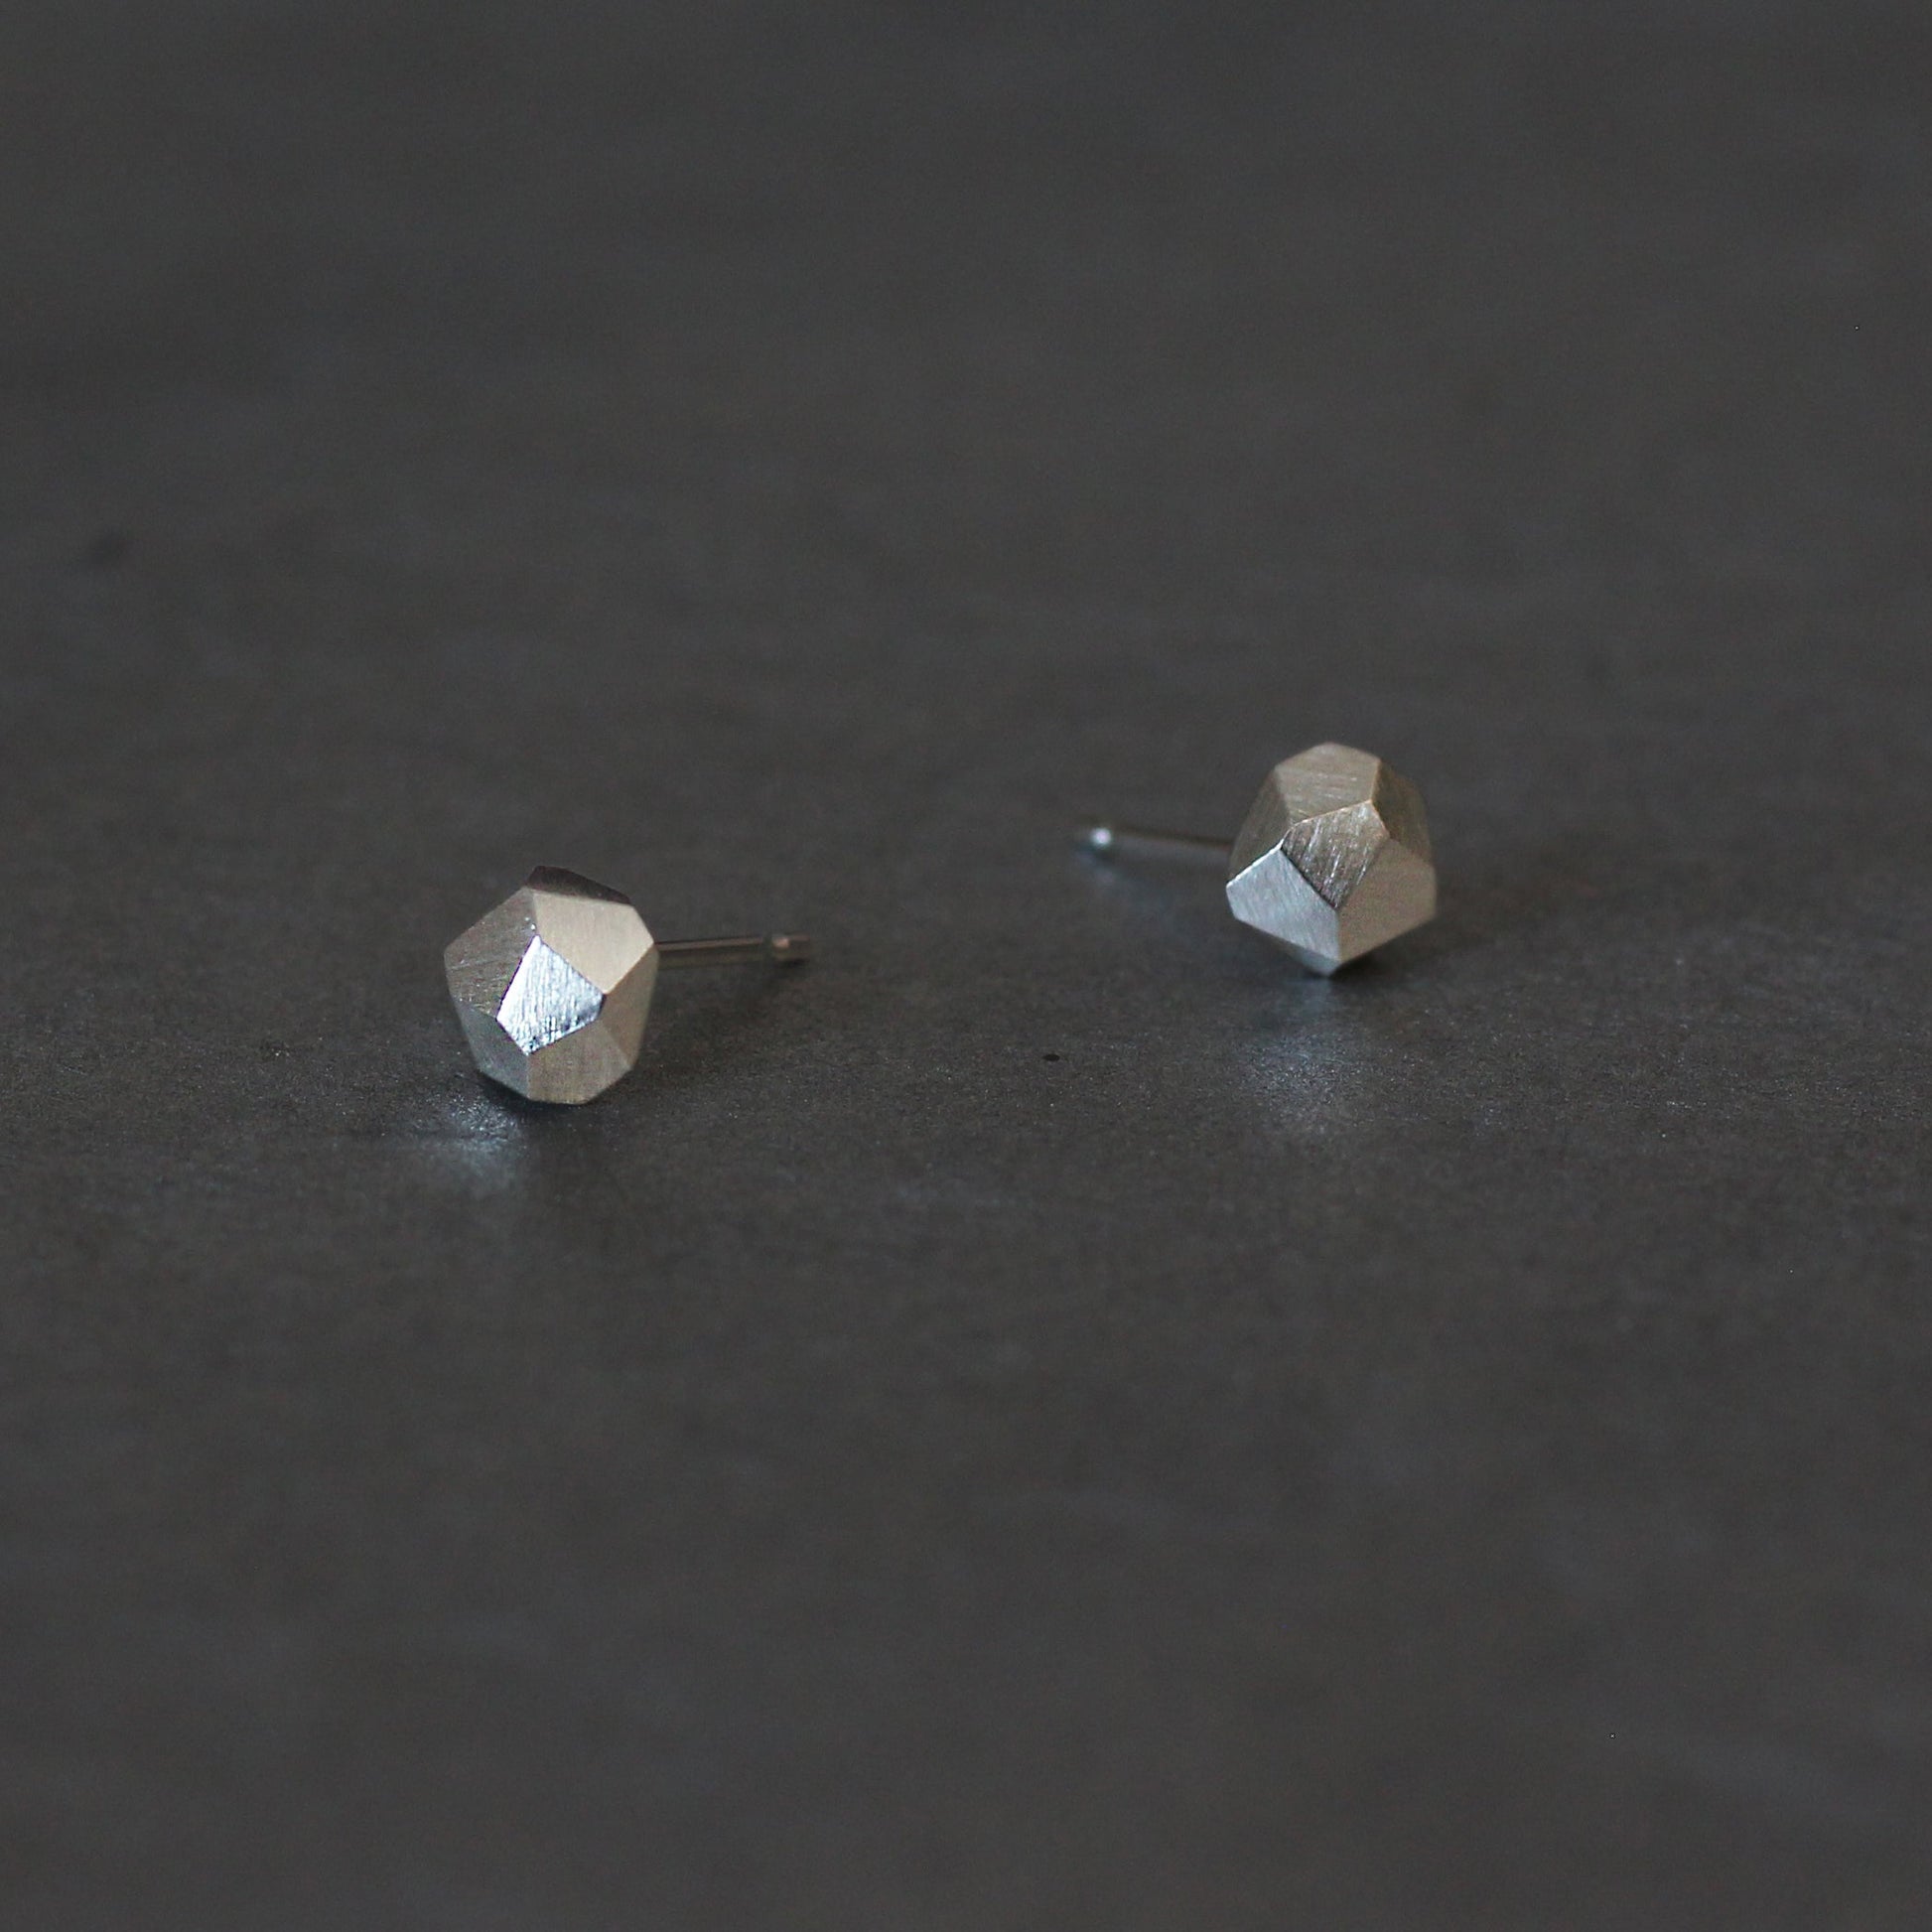 Geometric Polyhedron Faceted Stud Earrings - Silver - Aisling Chou Studio